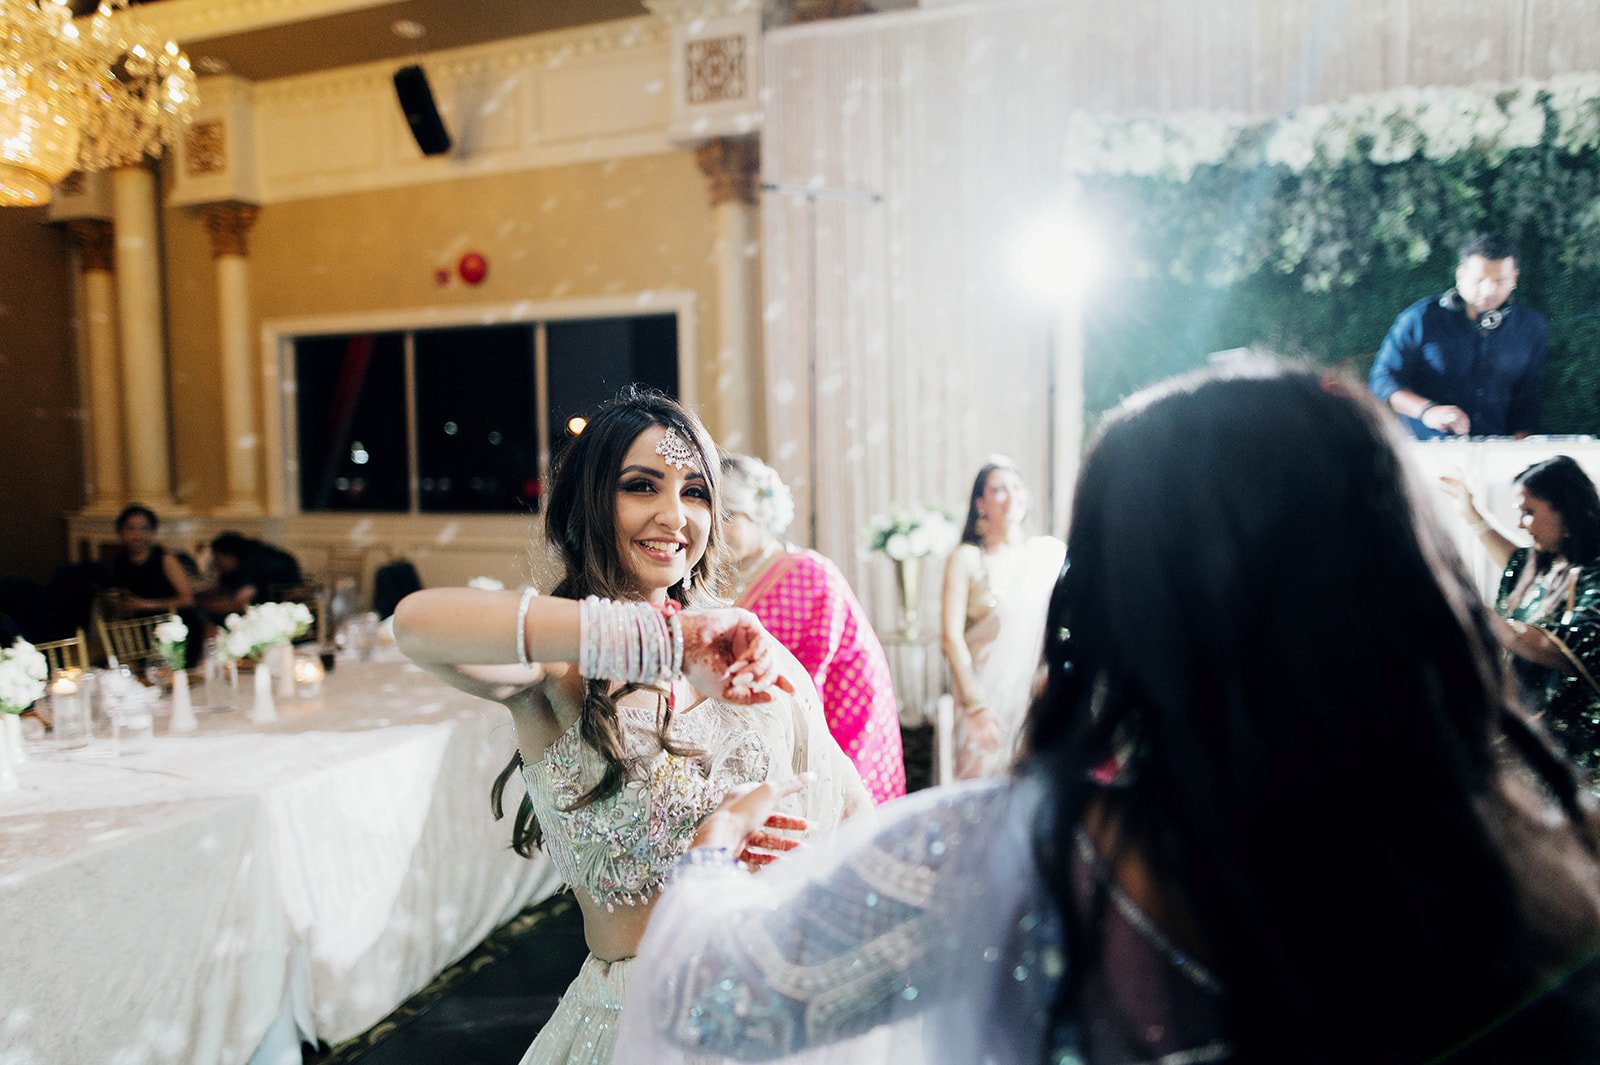 A fun, bumping dancing party at an indian wedding reception in Vancouver BC